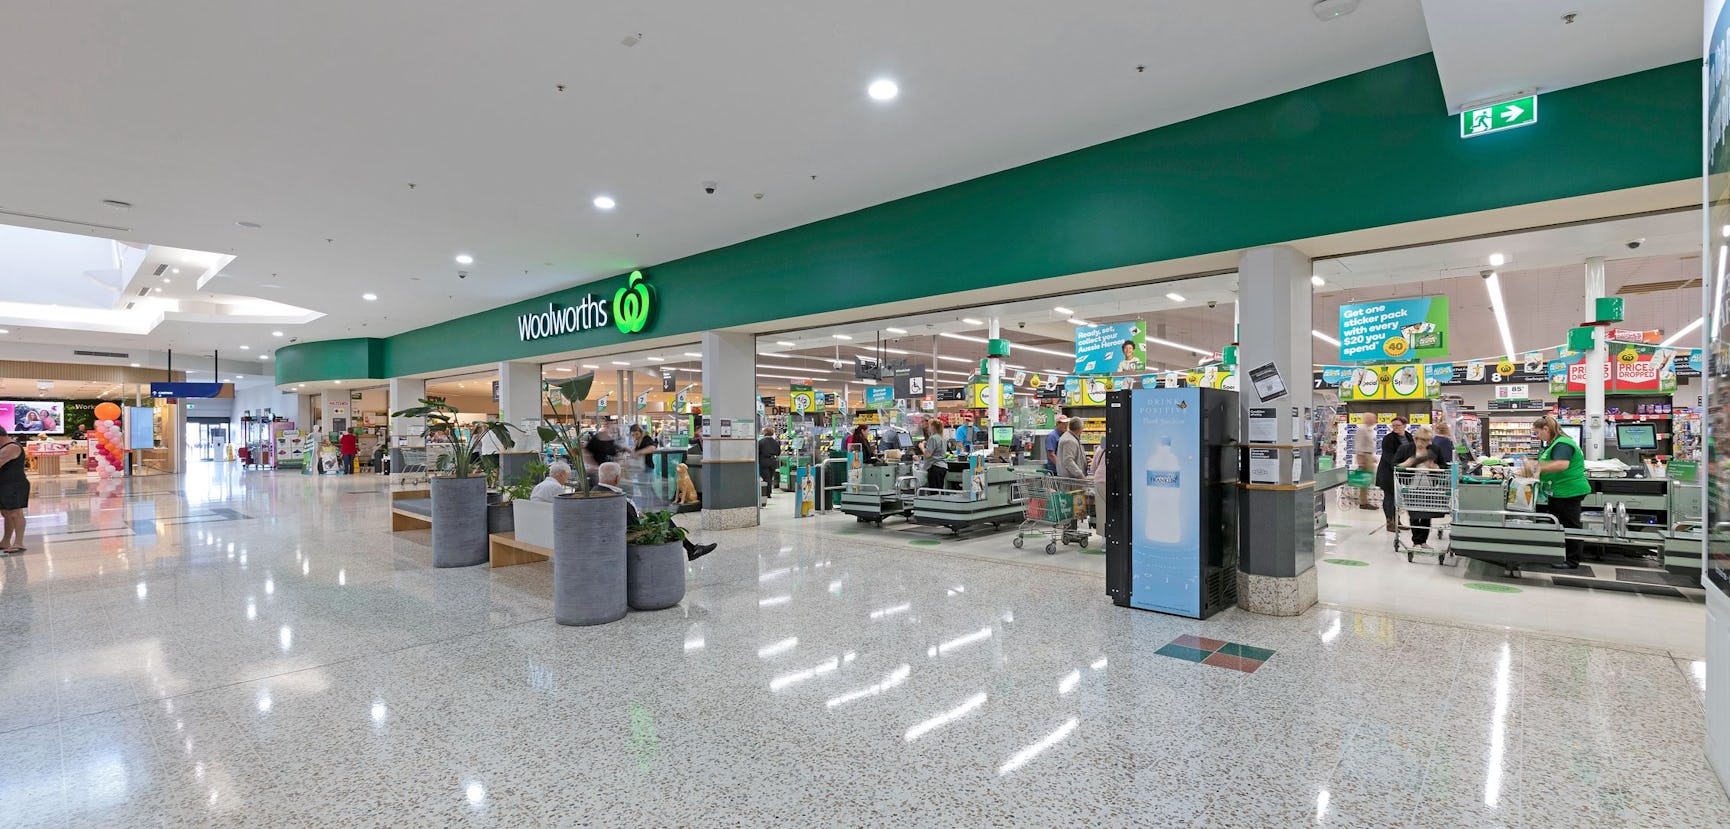 Shopping centre with a Woolworths